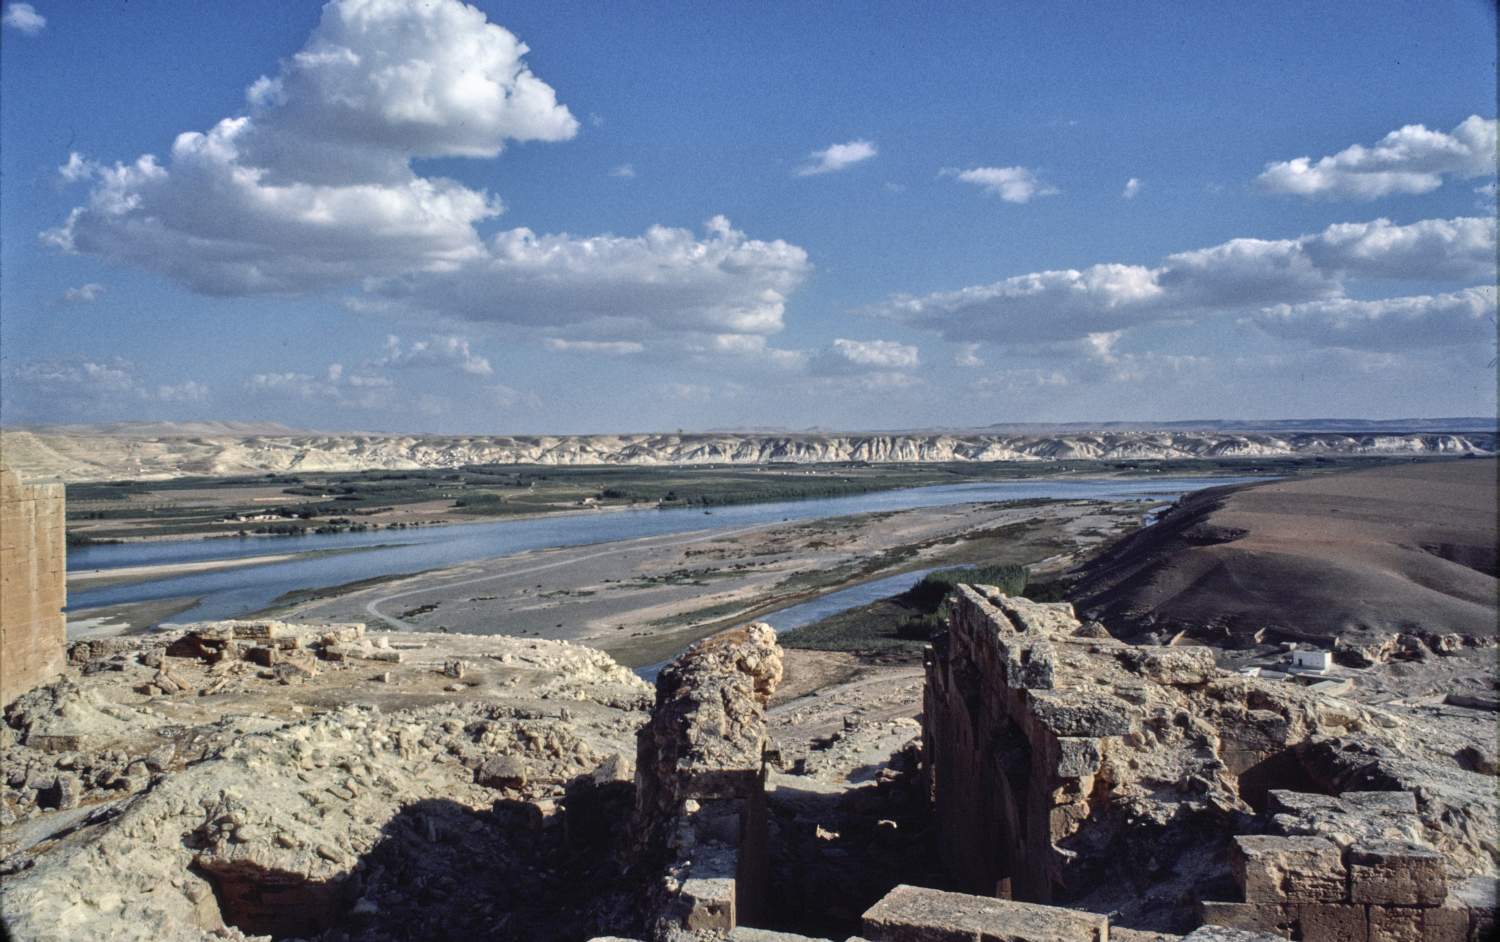 View from fortifications across Euphrates River.